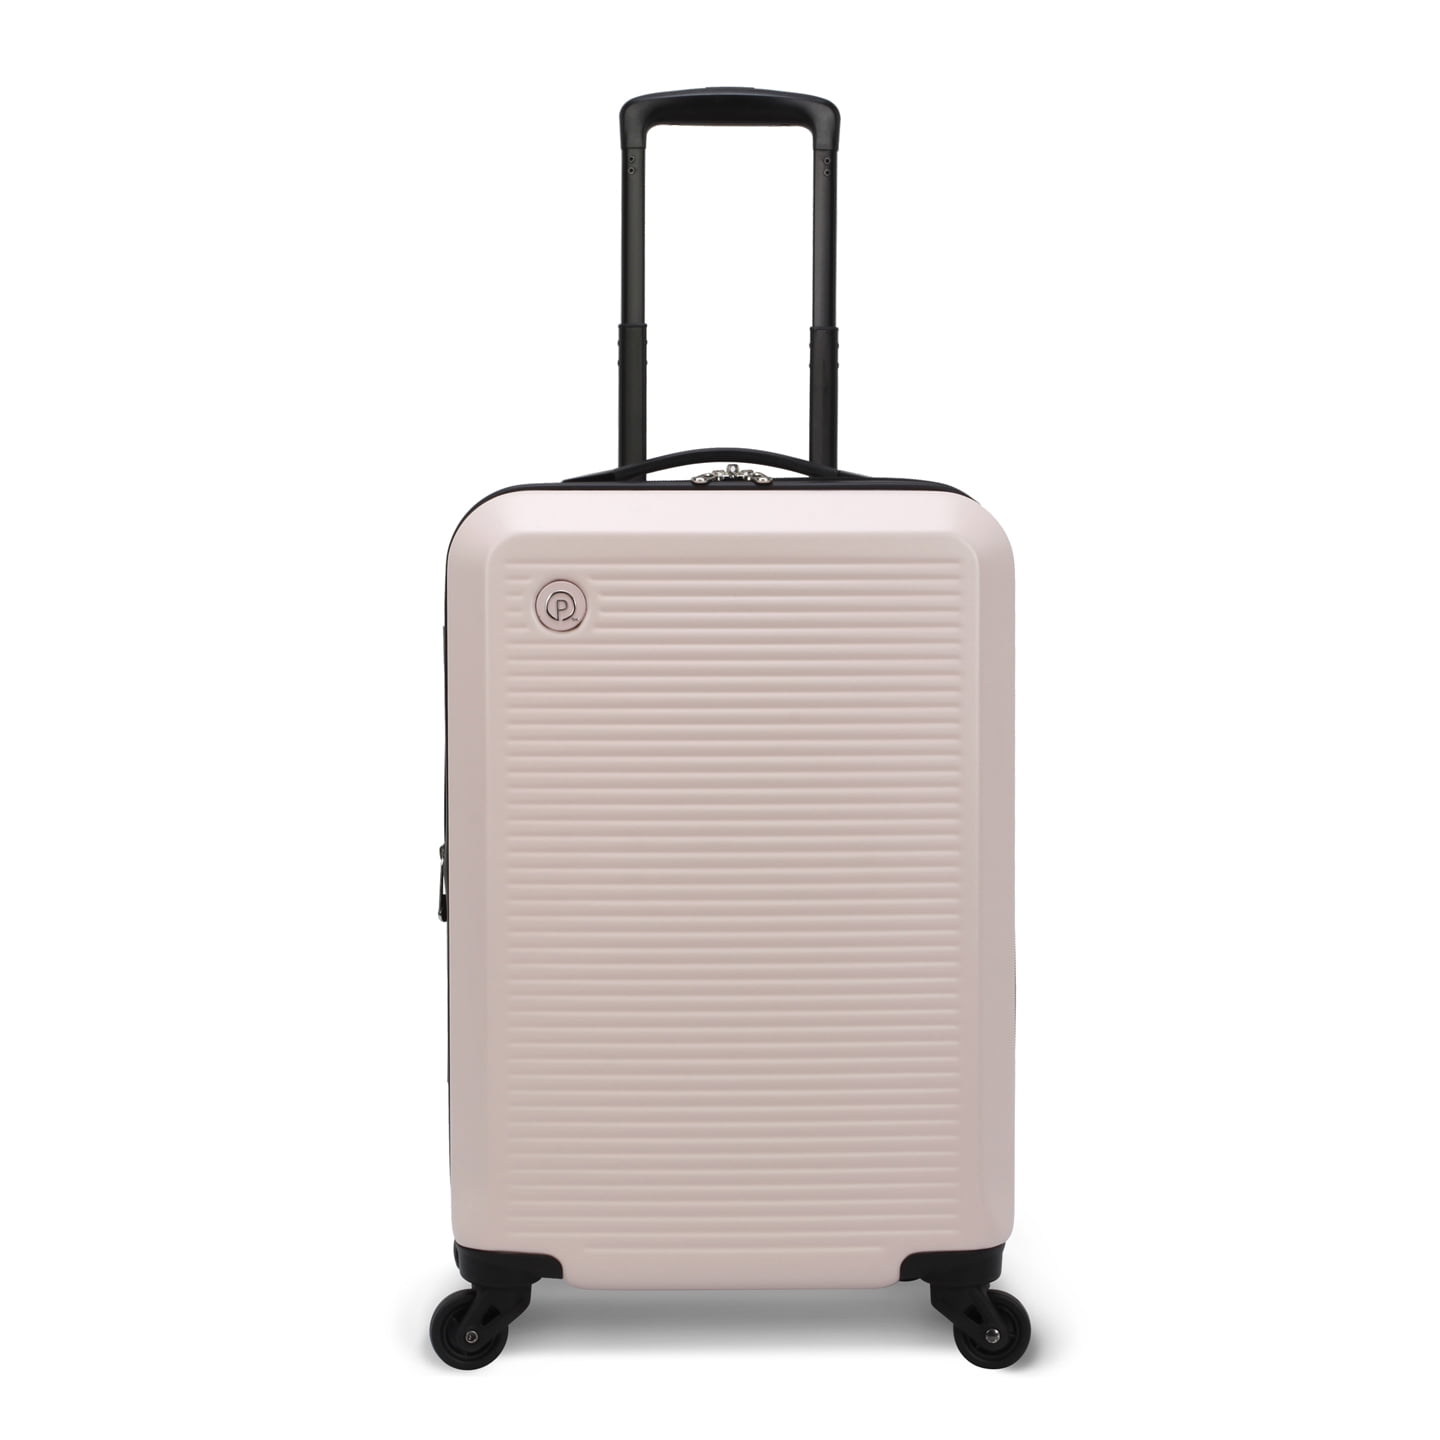 imiomo Carry on Luggage, 20 IN Carry-on Suitcase with Spinner Wheels,  Hardside 3PCS Set Lightweight Rolling Travel Luggage with TSA Lock(20/Pink)